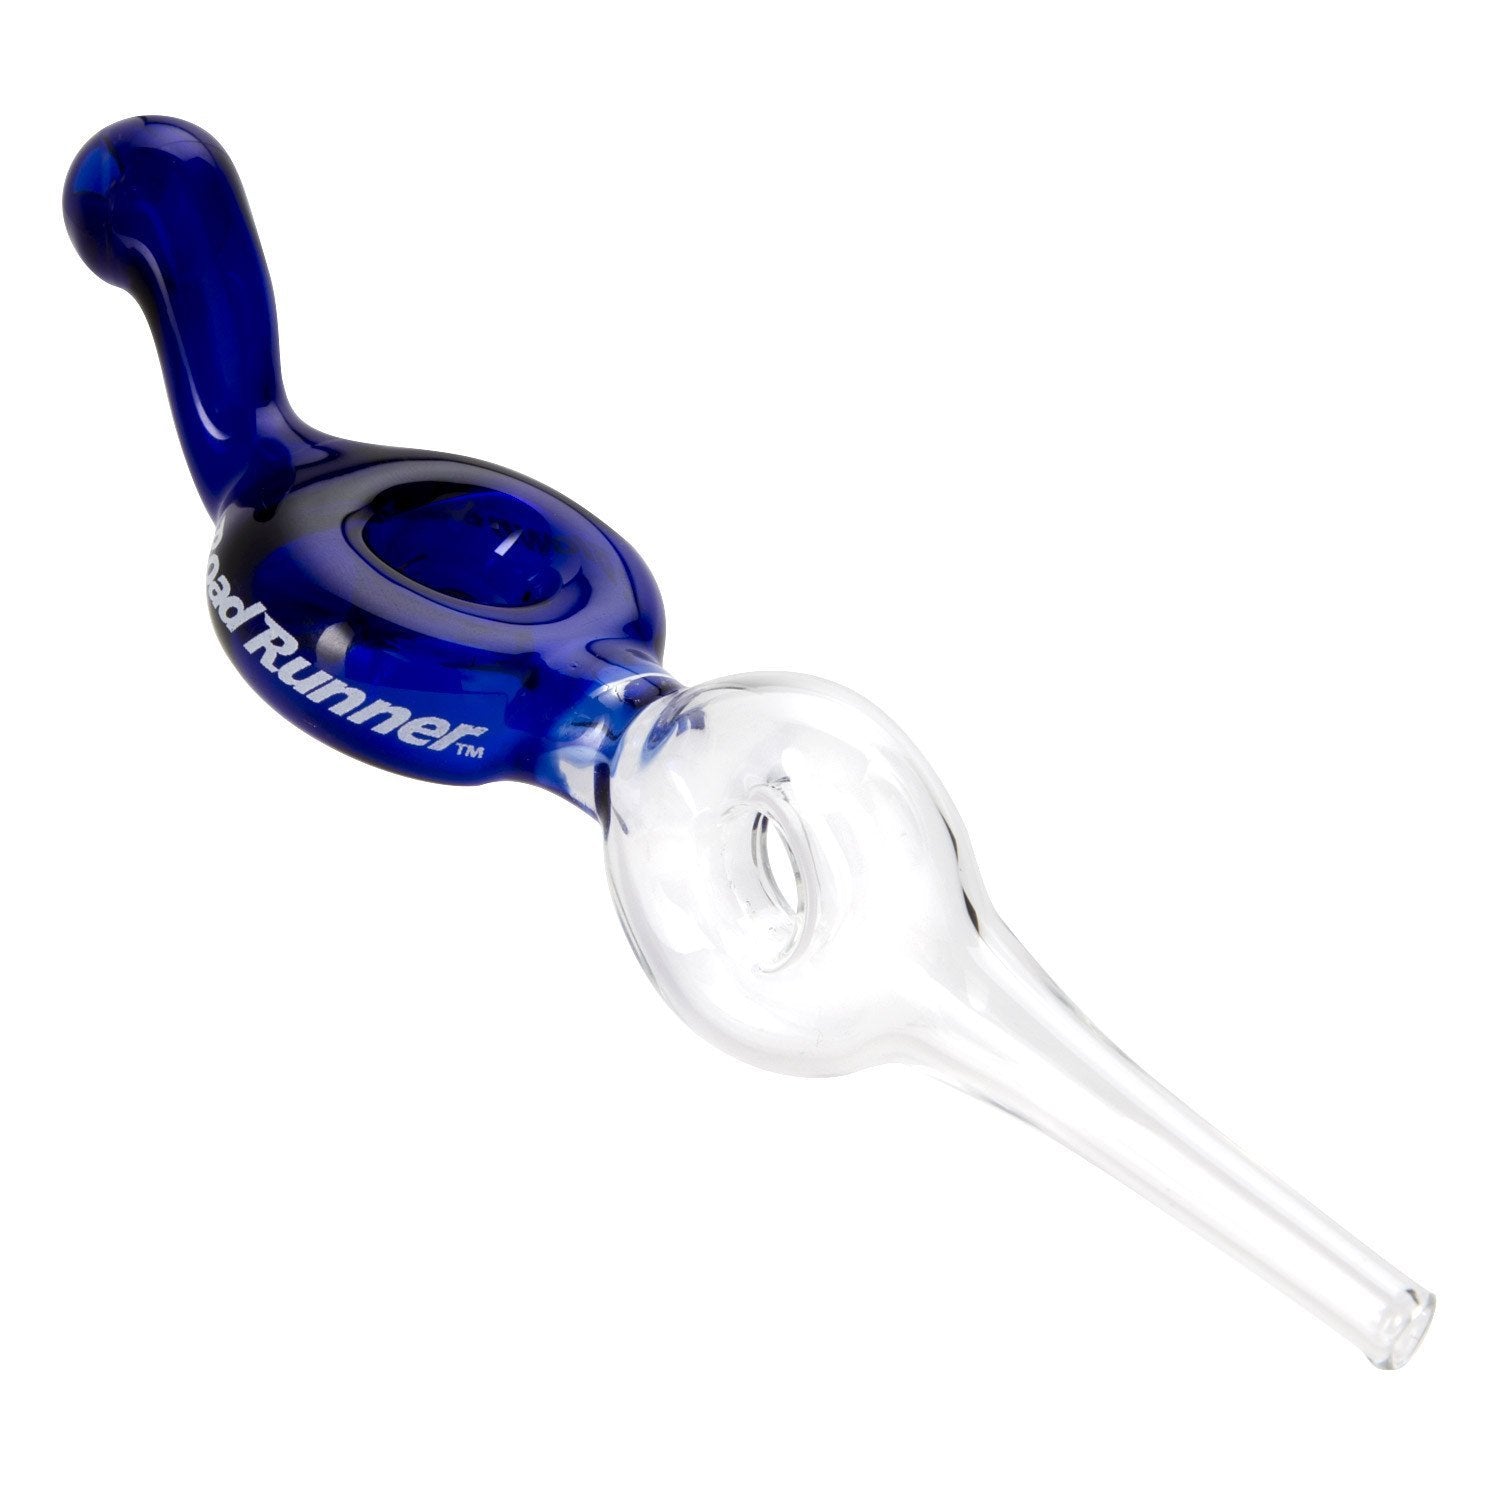 Dab Straws American Made Glass Pipes. Free Shipping on All USA Orders